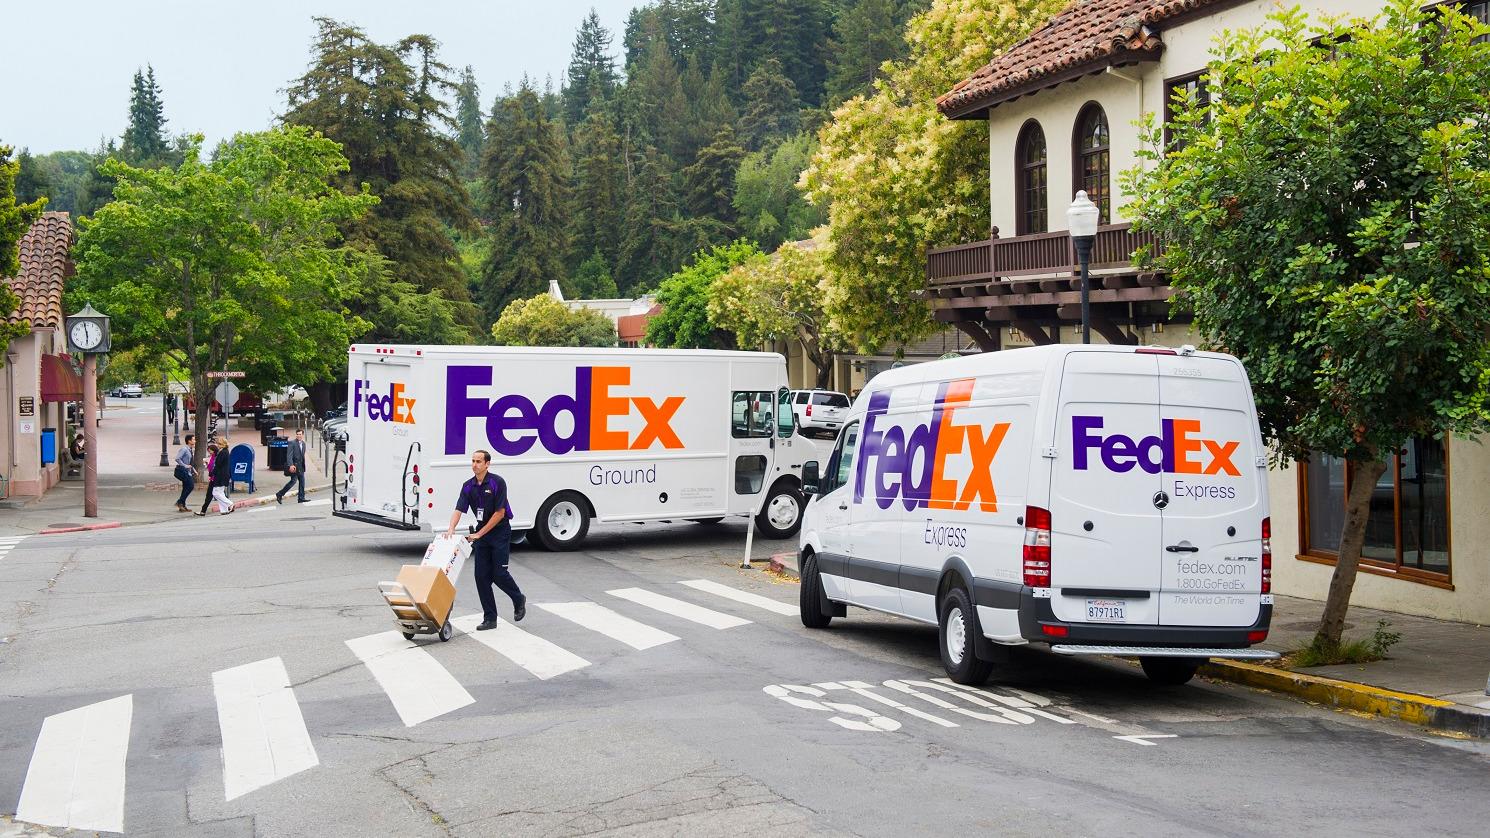 FedEx Home Delivery